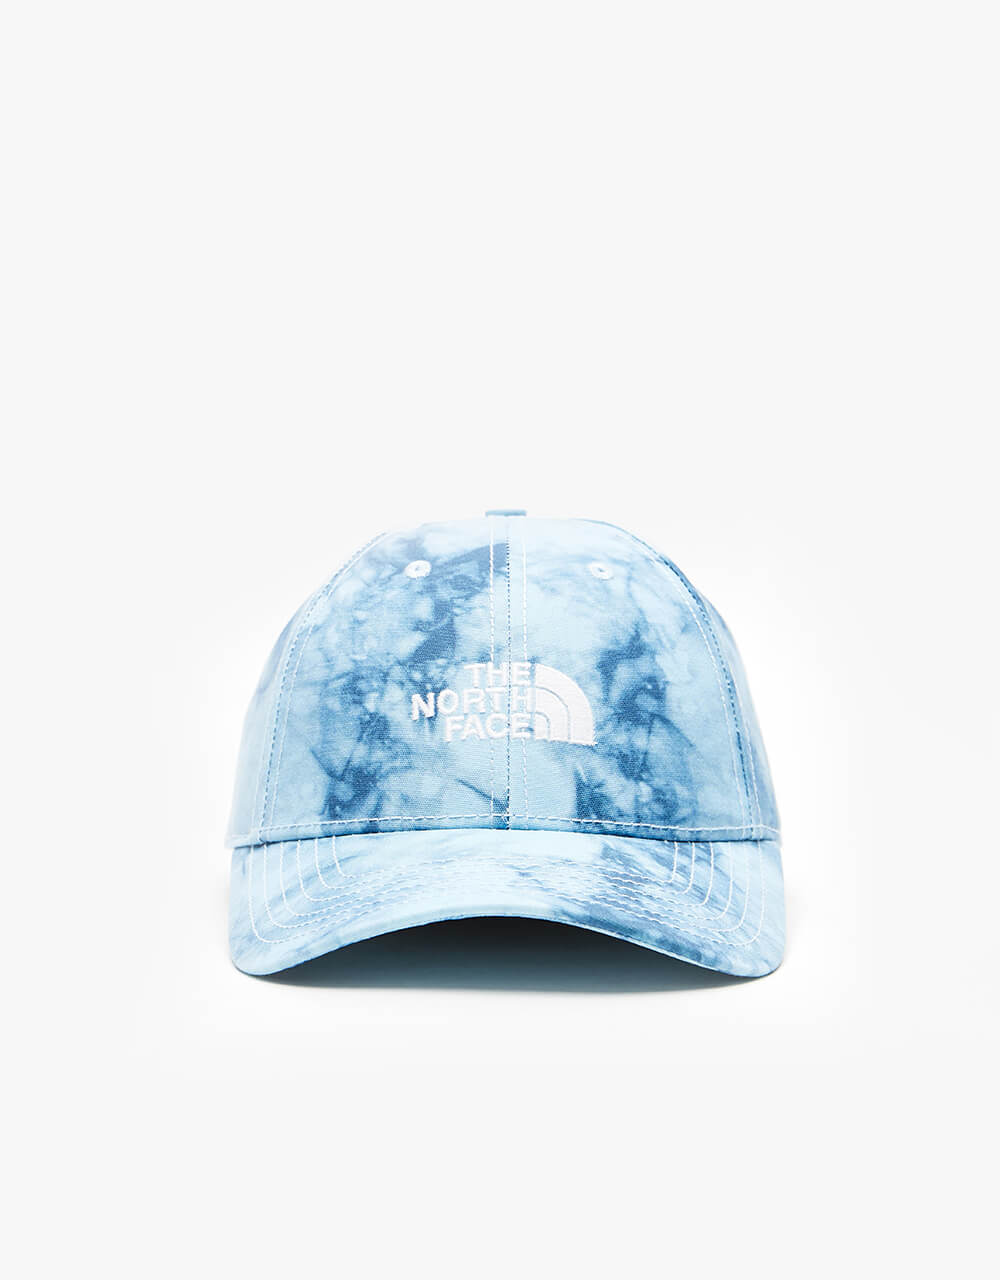 The North Face Recycled 66 Classic Cap - Beta Blue Dye Texture Print